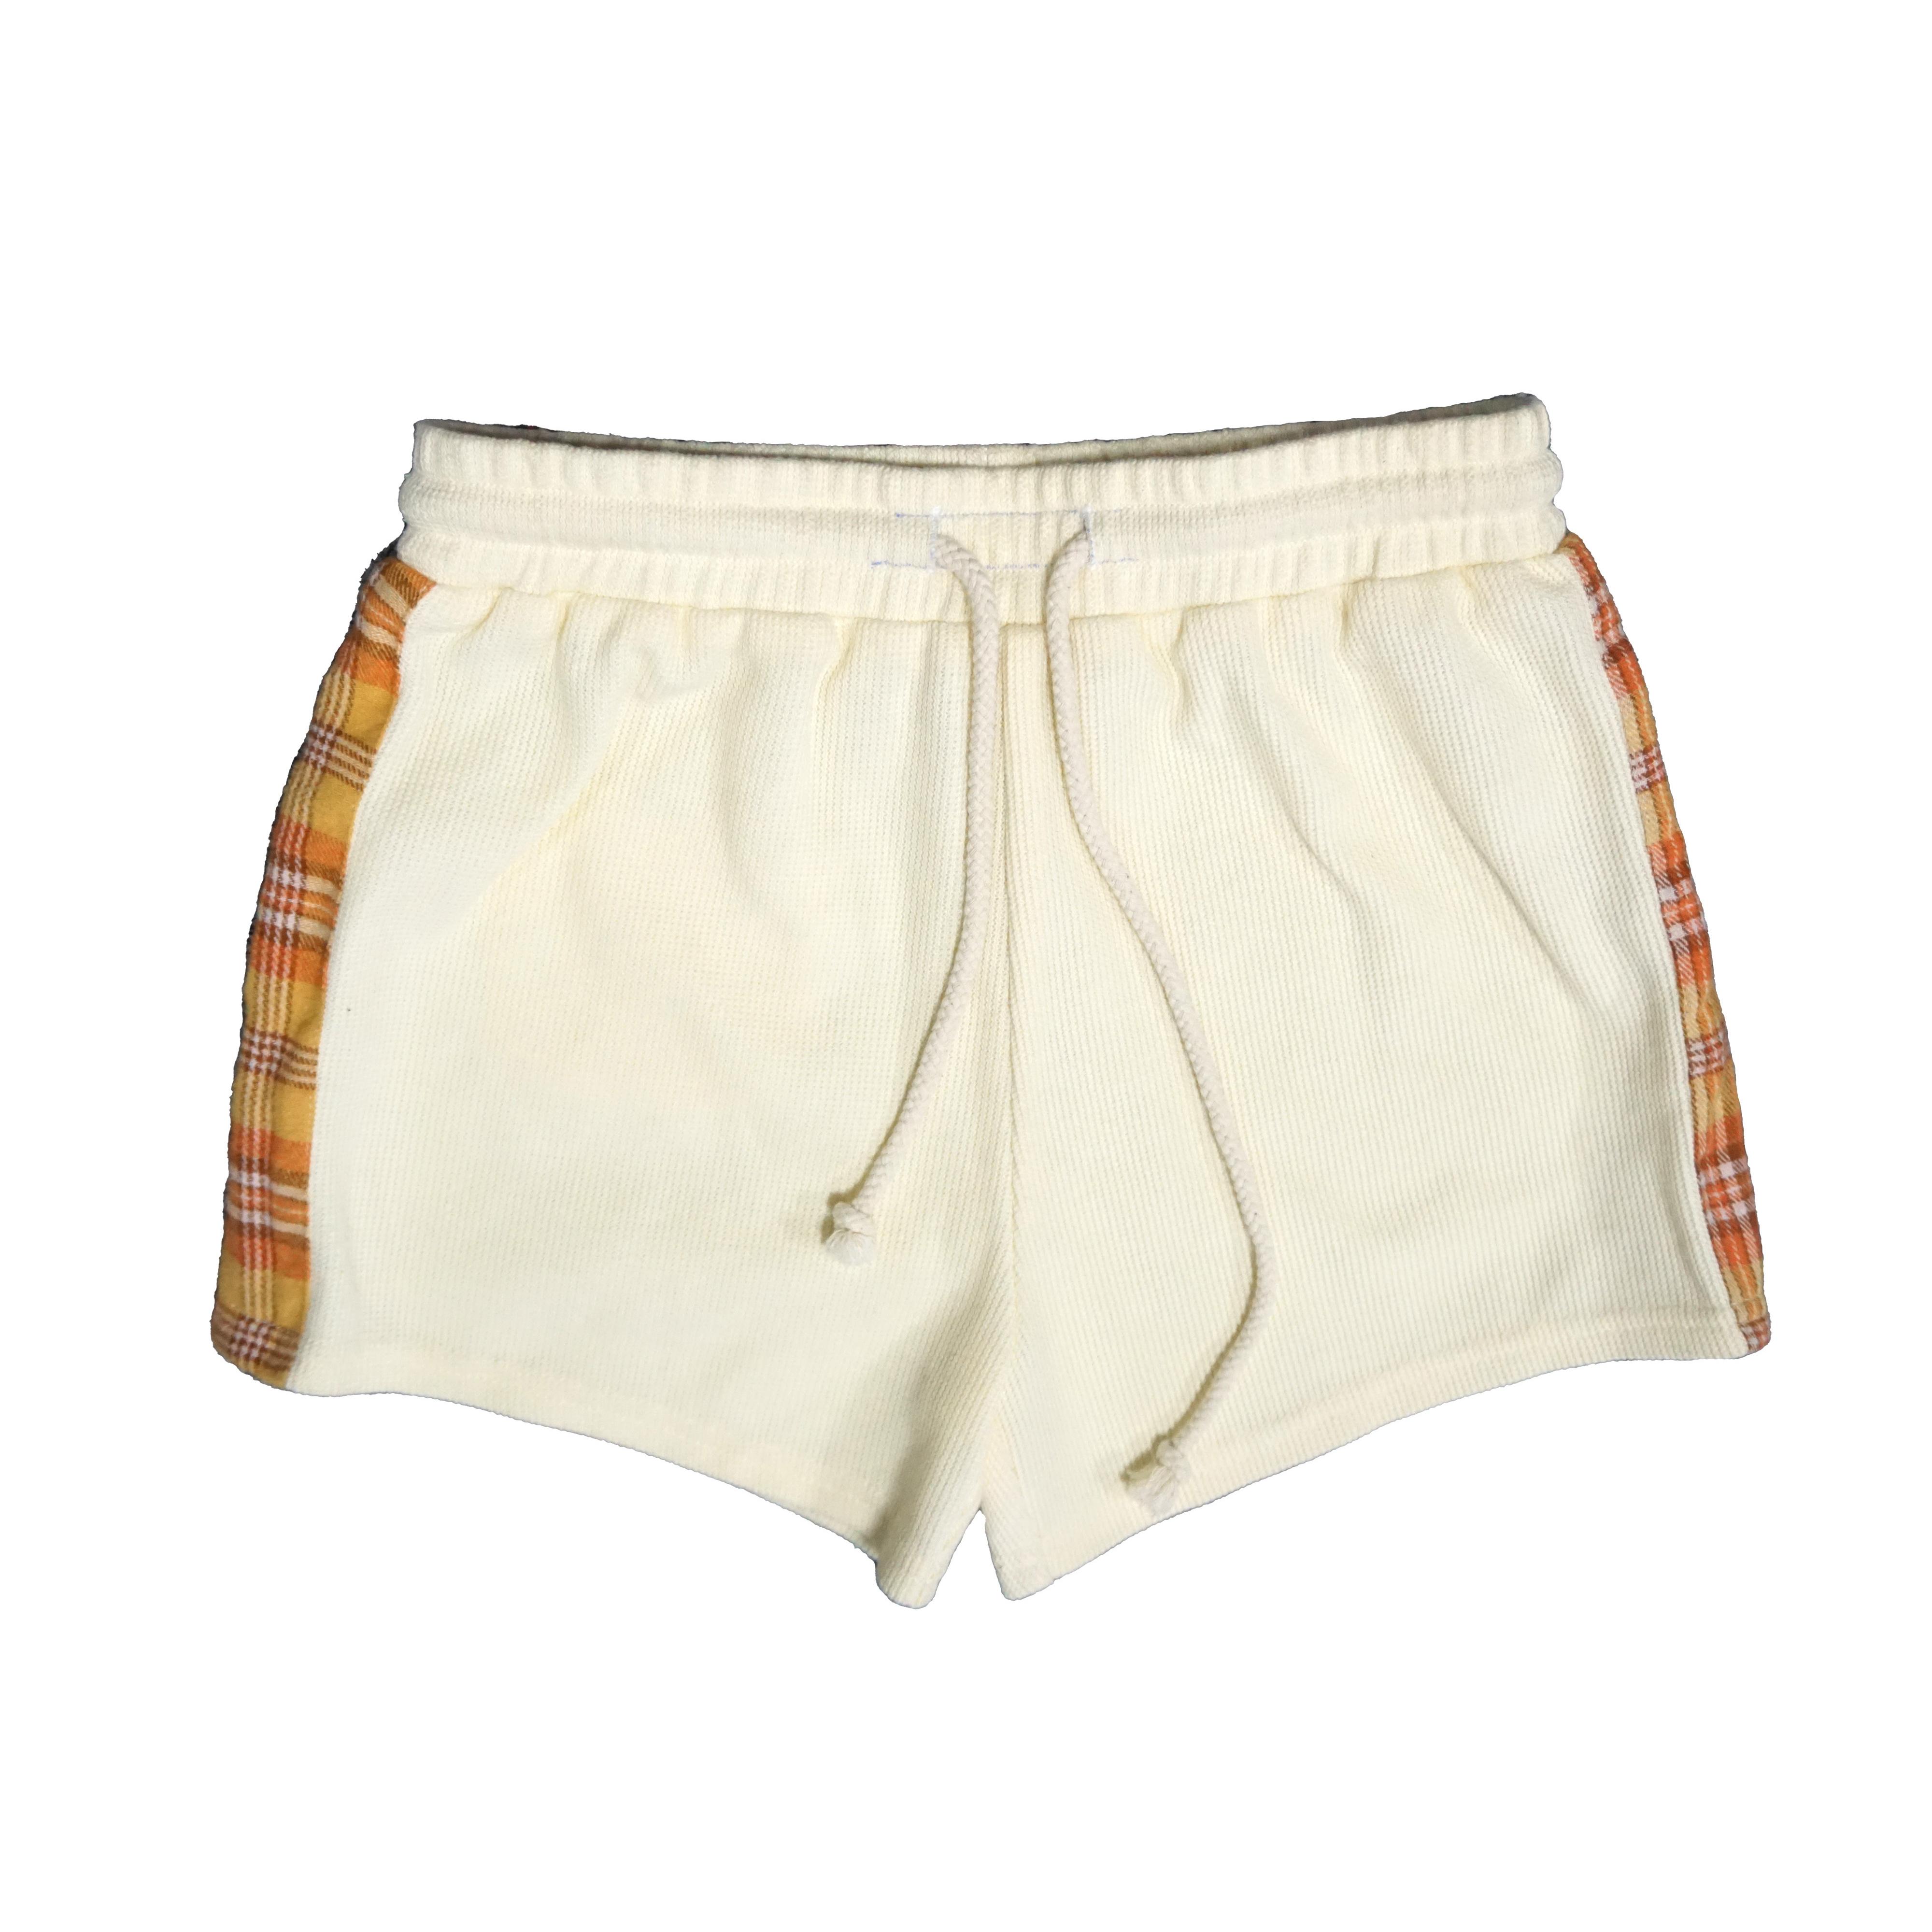 Summer casual high -quality sports children’s shorts